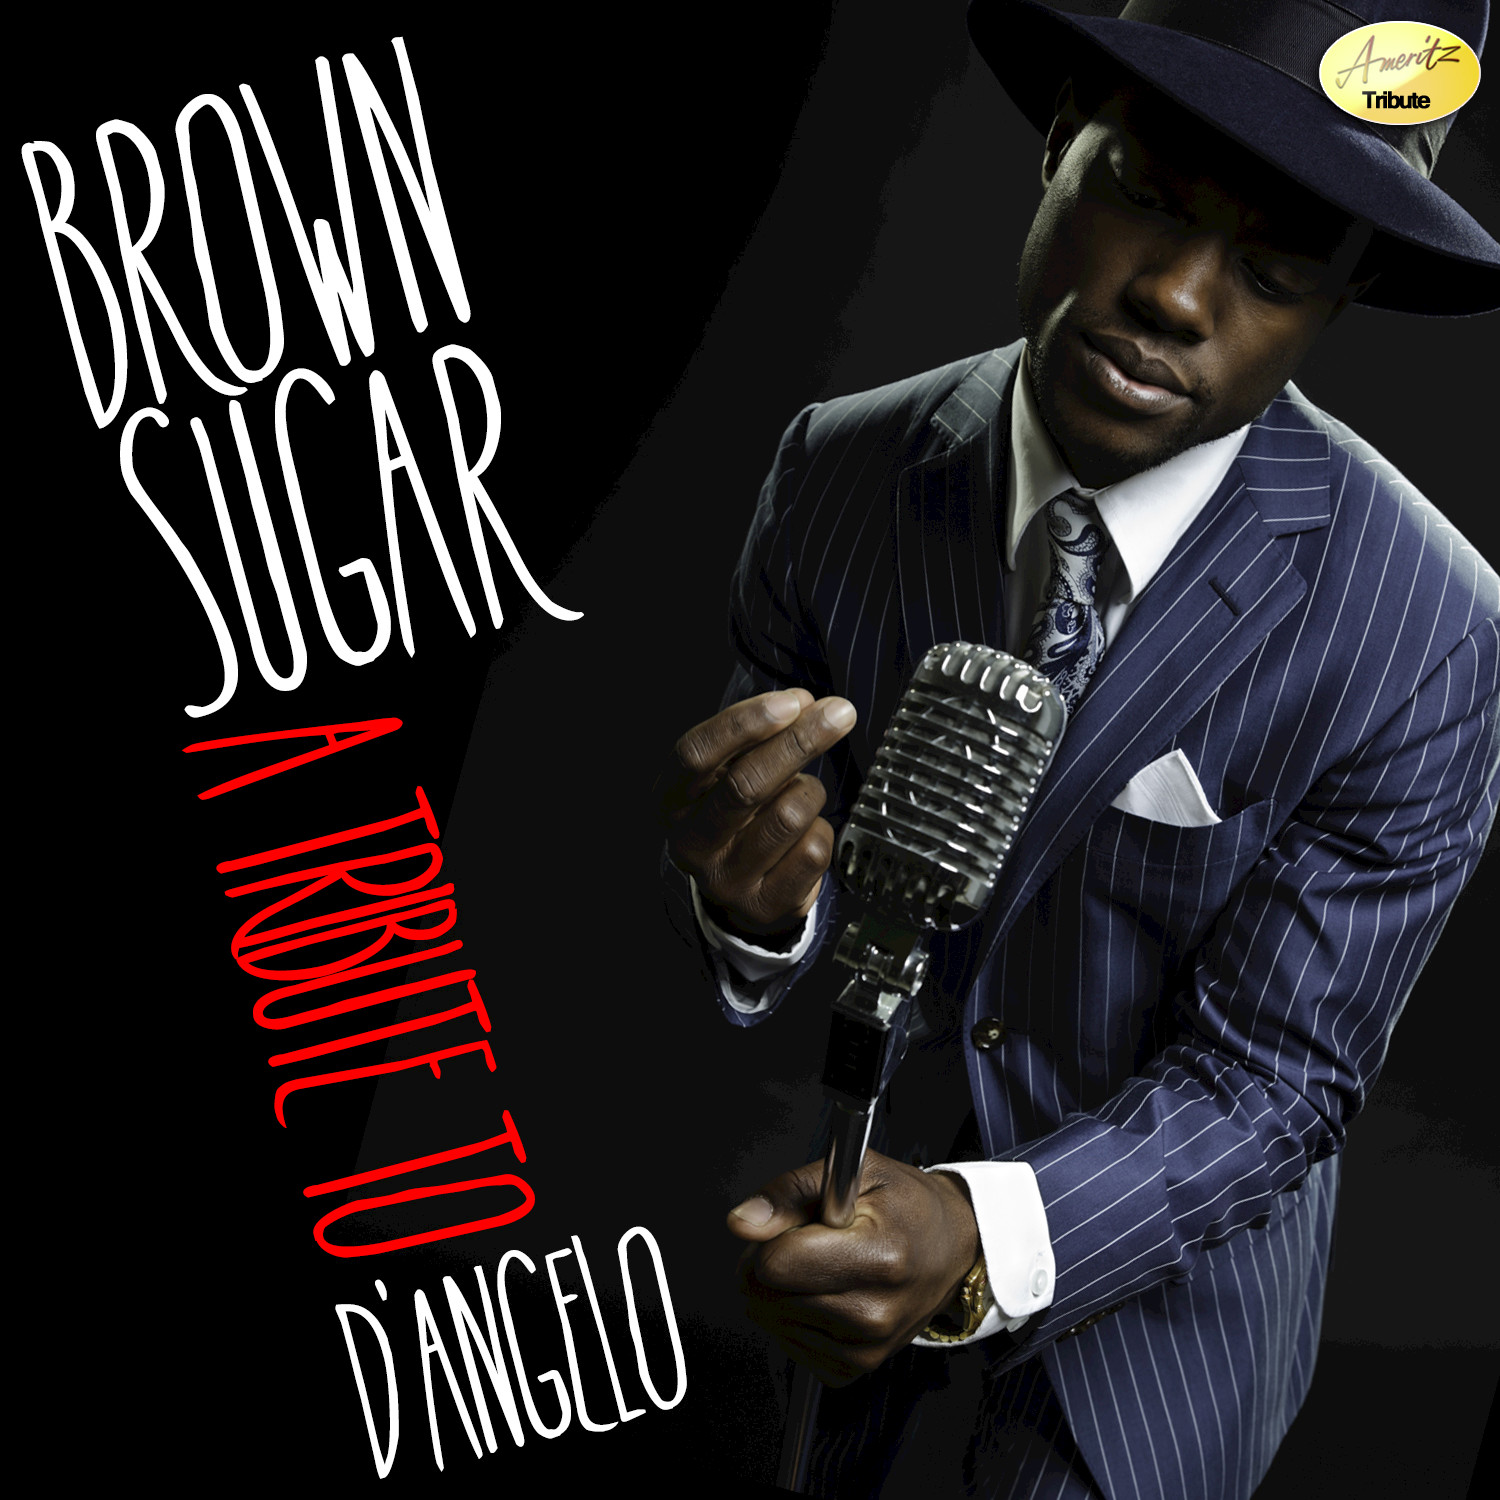 Brown Sugar (A Tribute to D'Angelo)